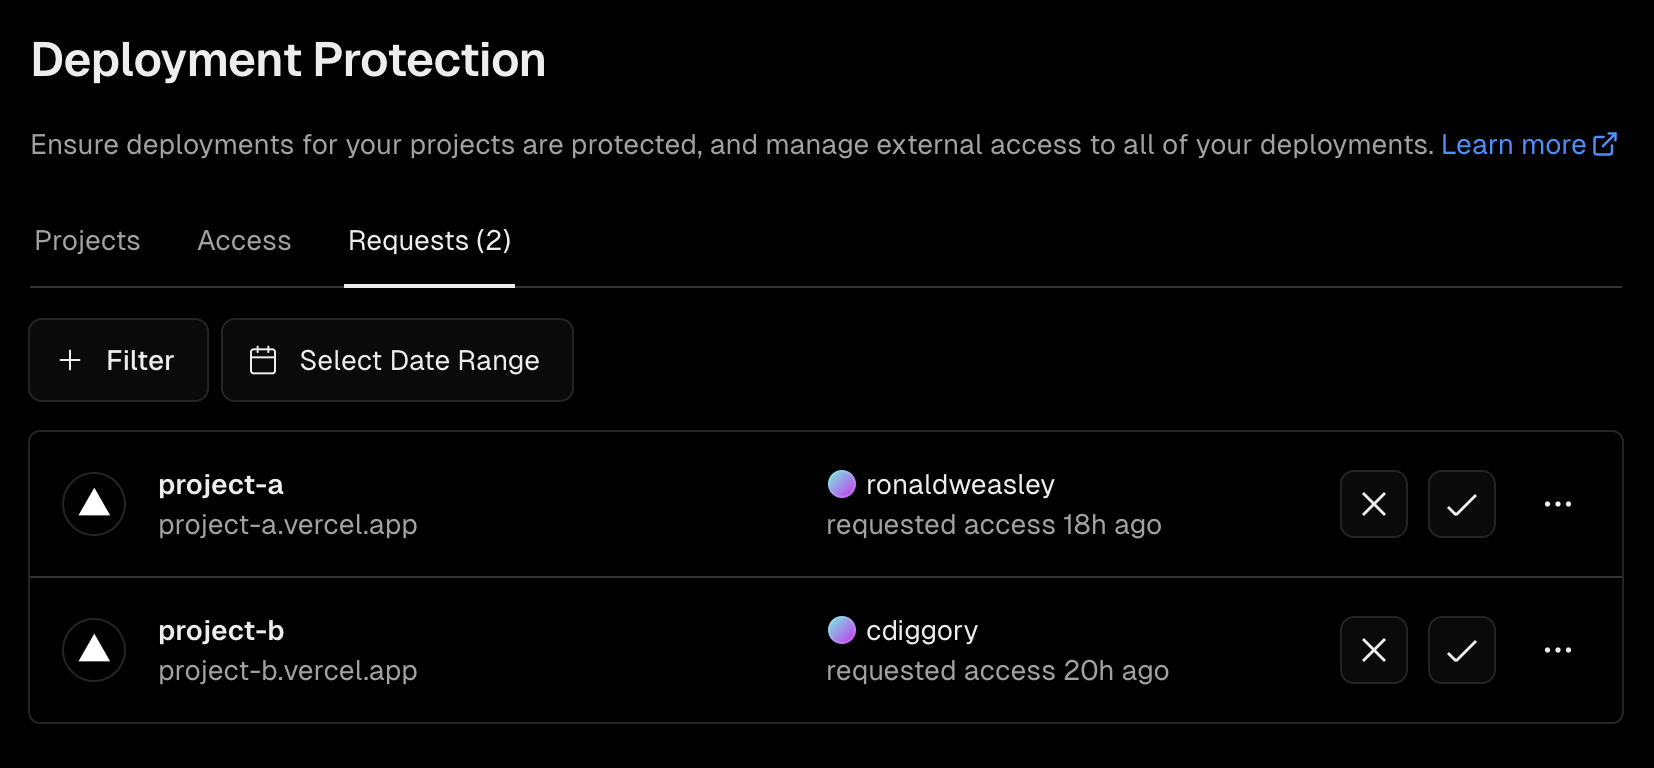 Access requests can be approved and declined on the Dashboard > Settings > Deployment Protection > Requests section.